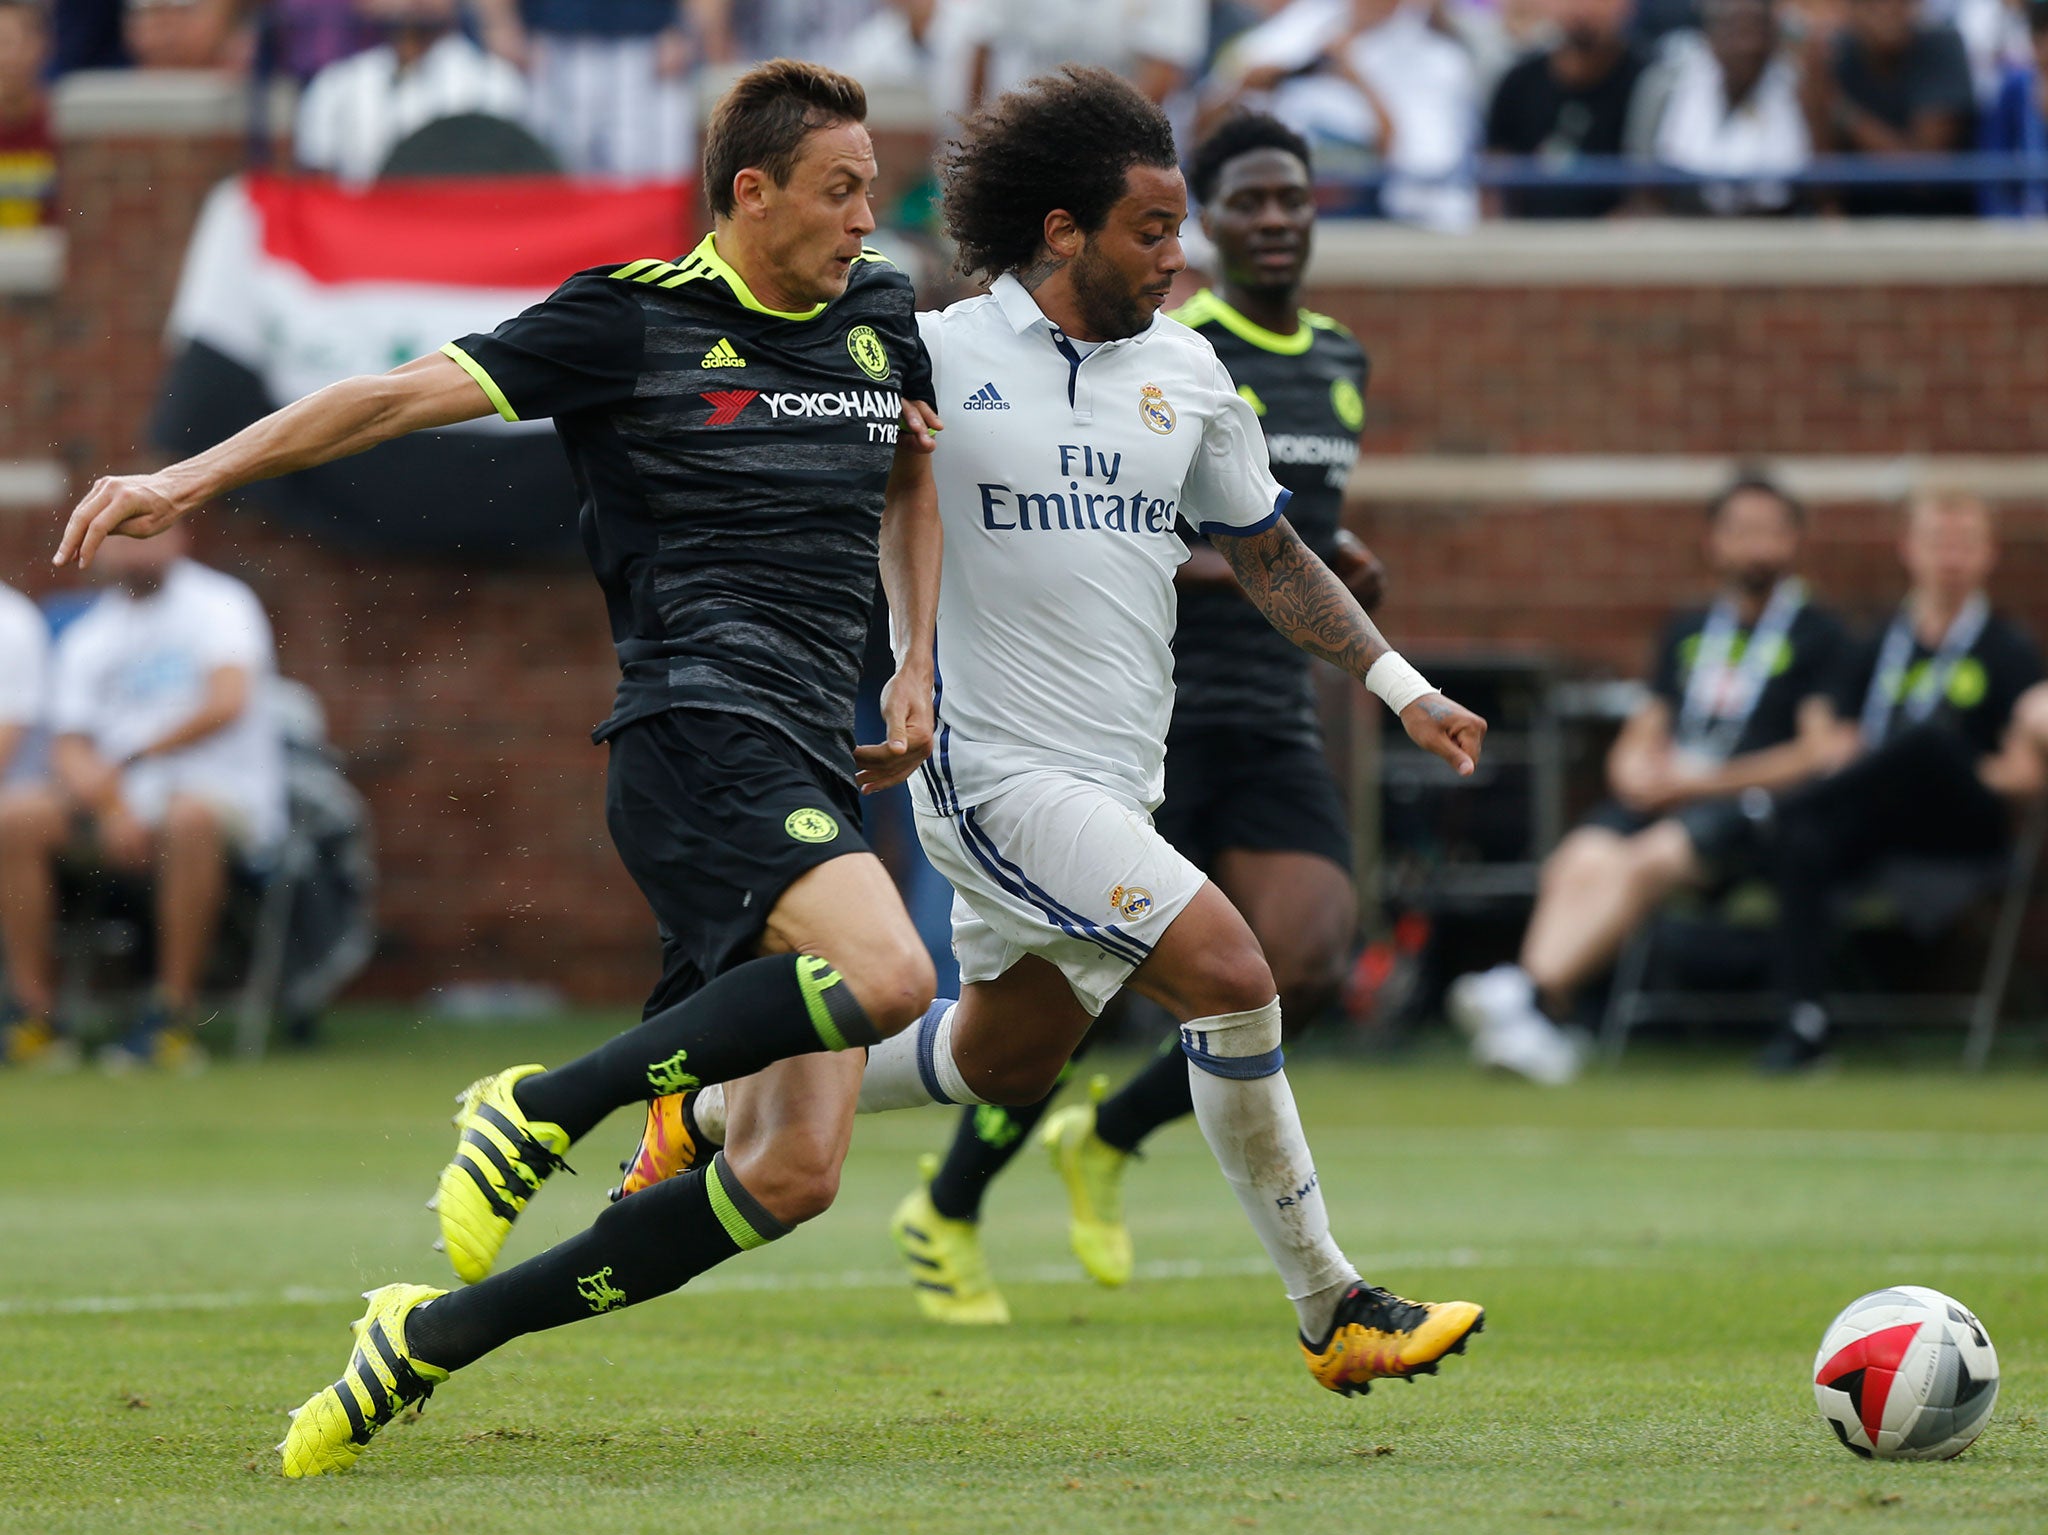 Nemanja Matic and Marcelo compete for the ball